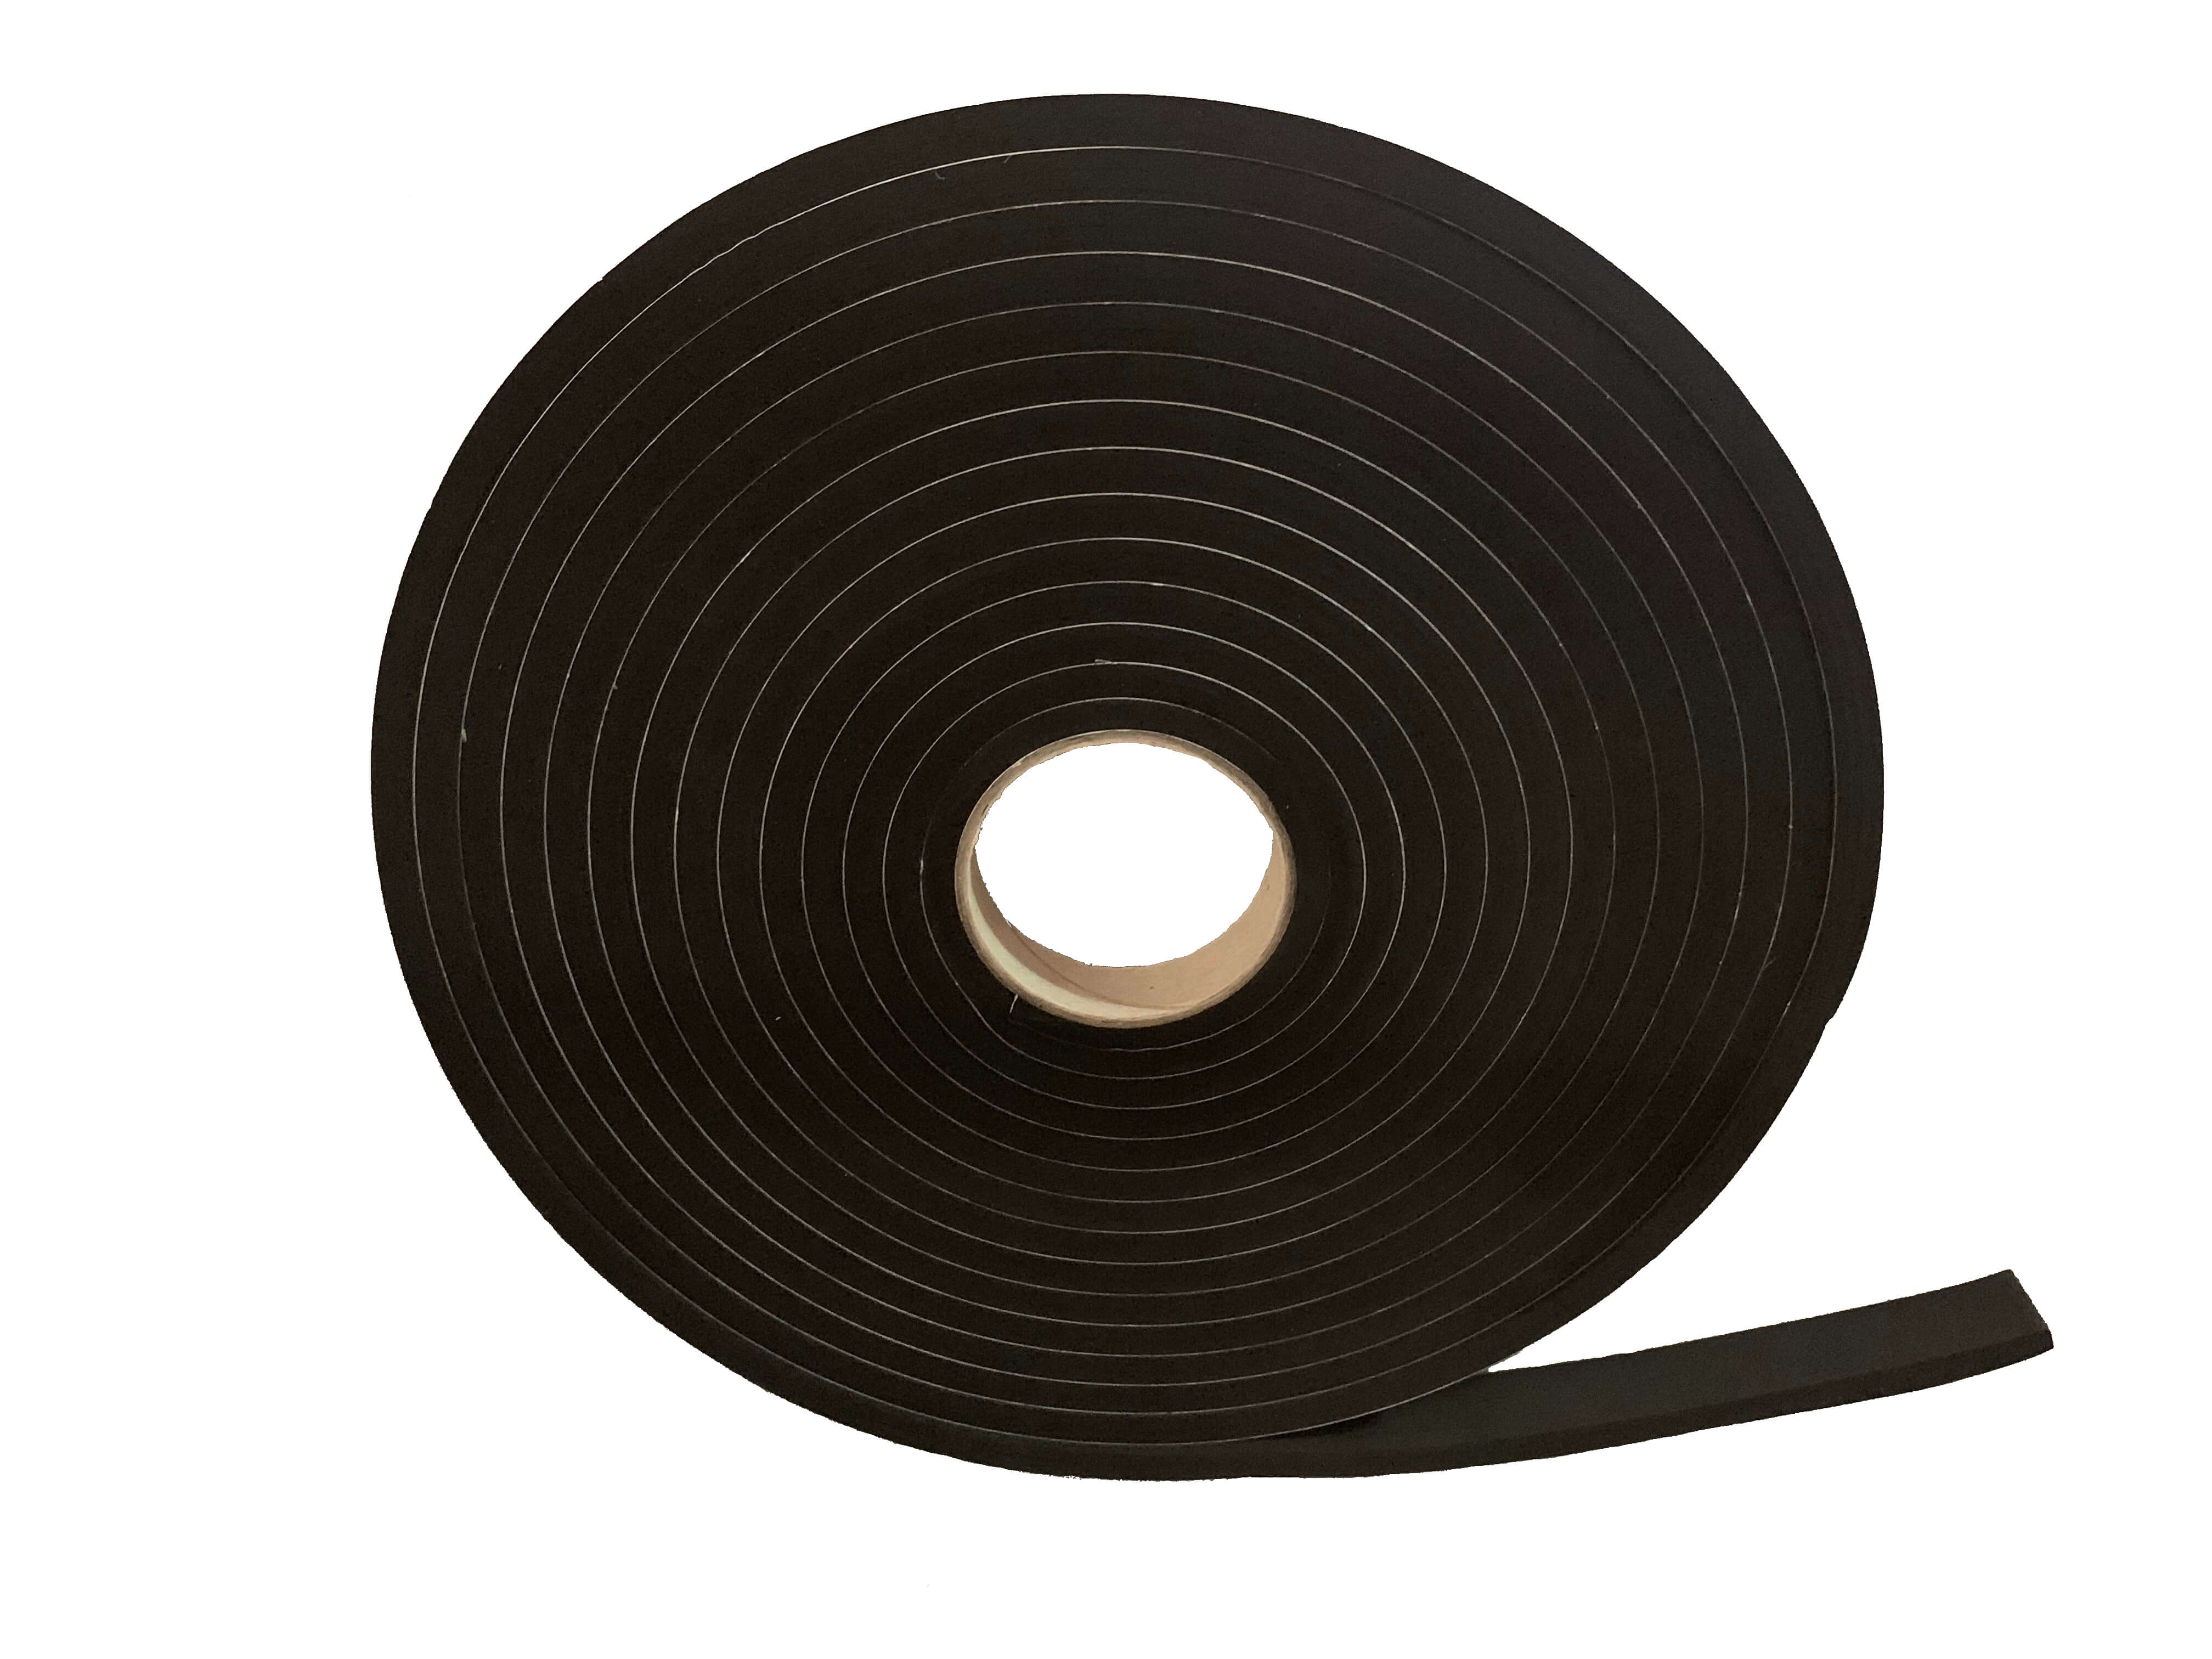 Resilient Sealing Tape - Various Sizes Available - 0